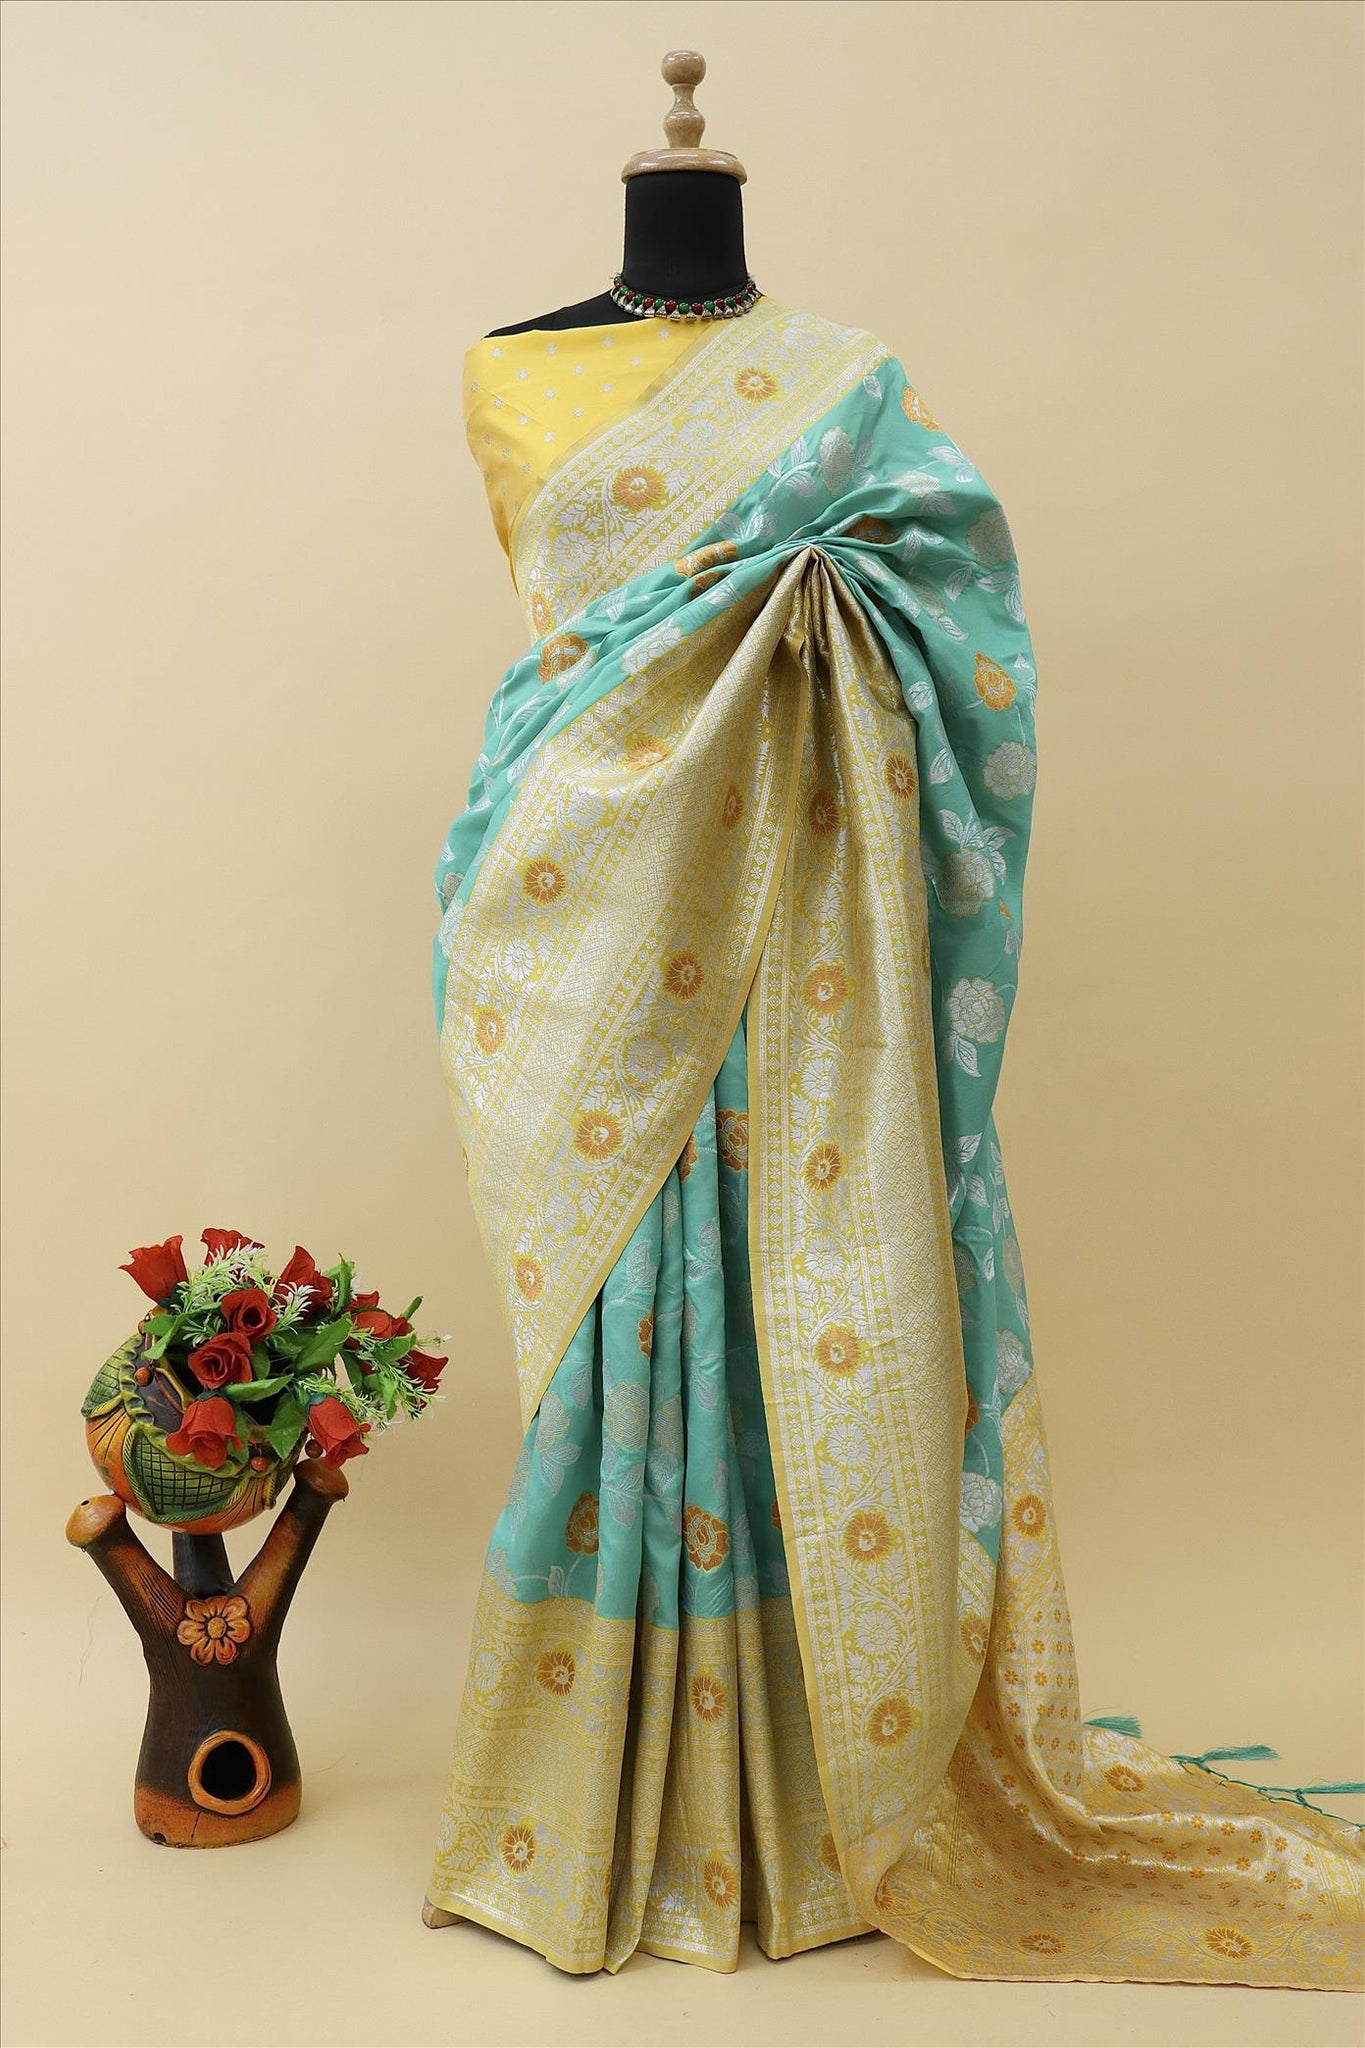 Sea Green With Gold Contrast With Silver And Copper Jari Jacquard Pattu Saree-mb's 4 Fider Jps-1051